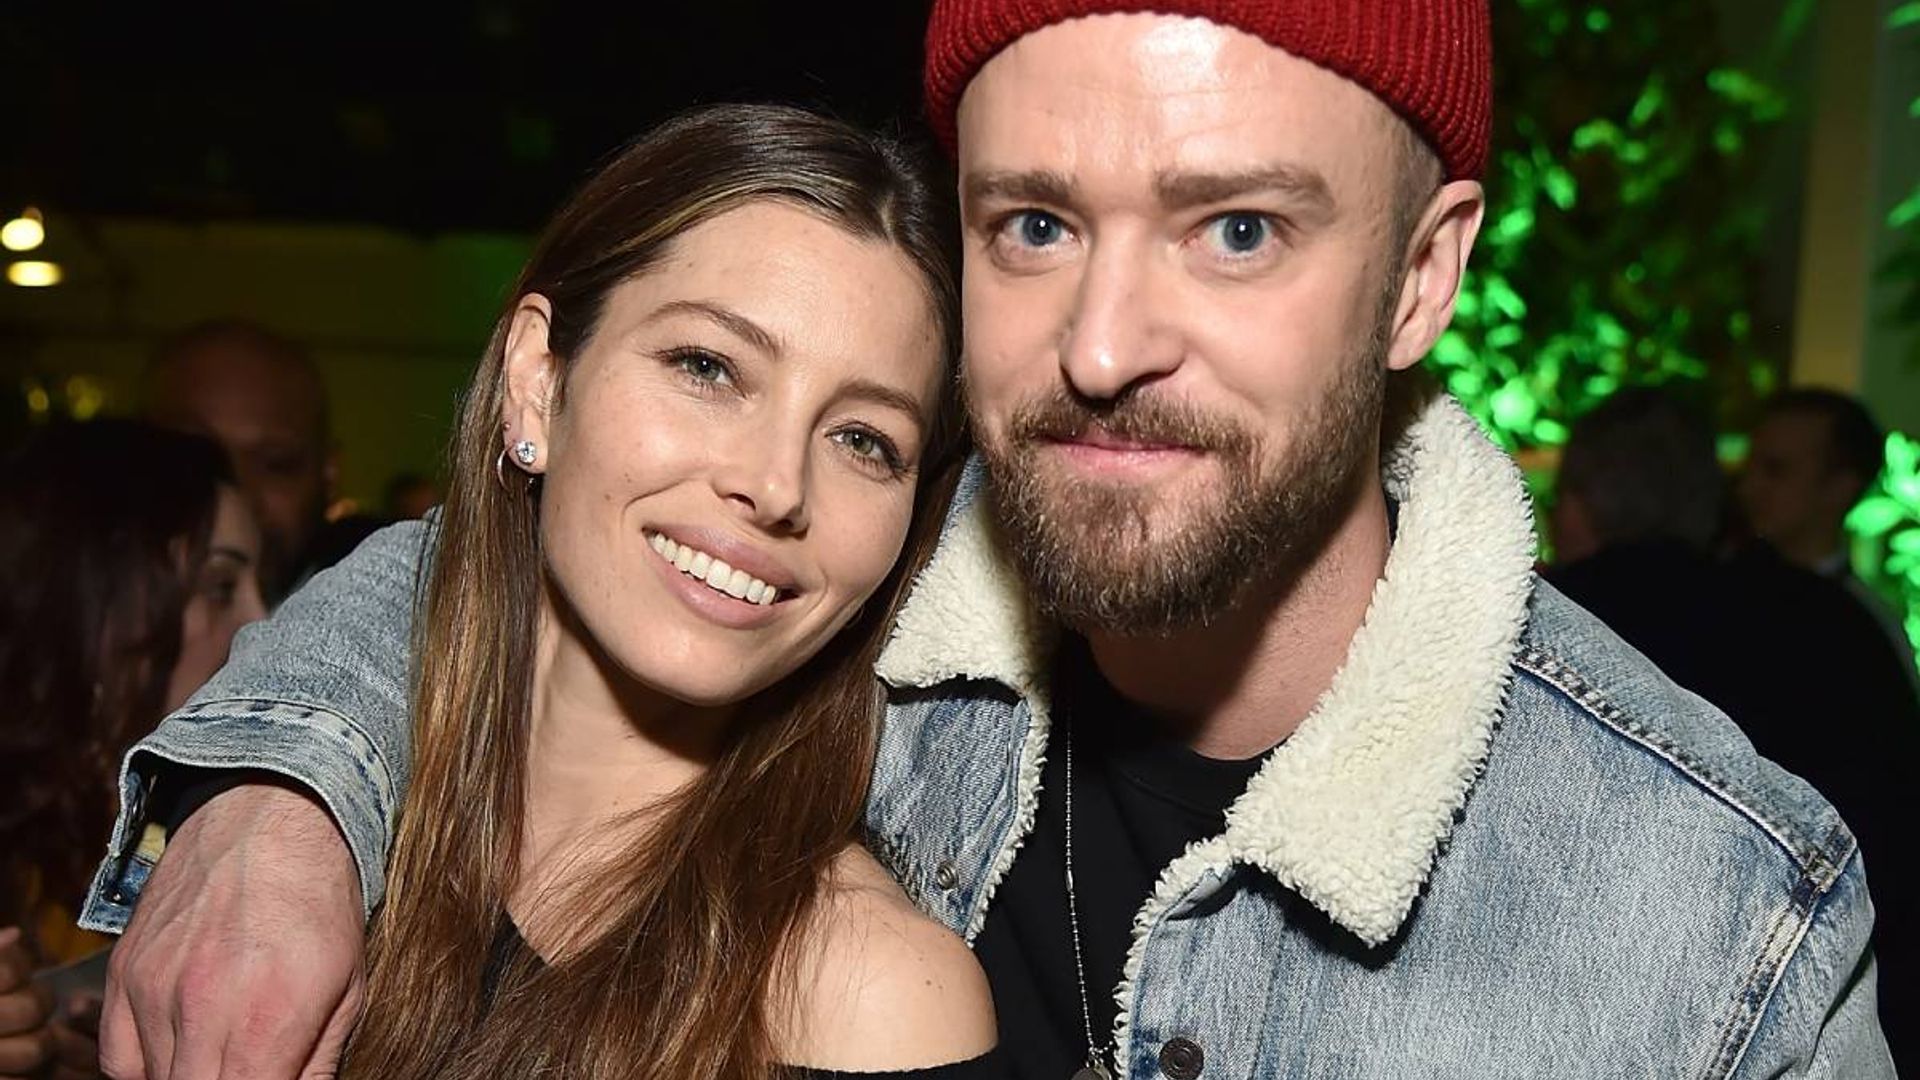 Justin Timberlake shares never-before-seen photos with wife Jessica Biel to mark birthday